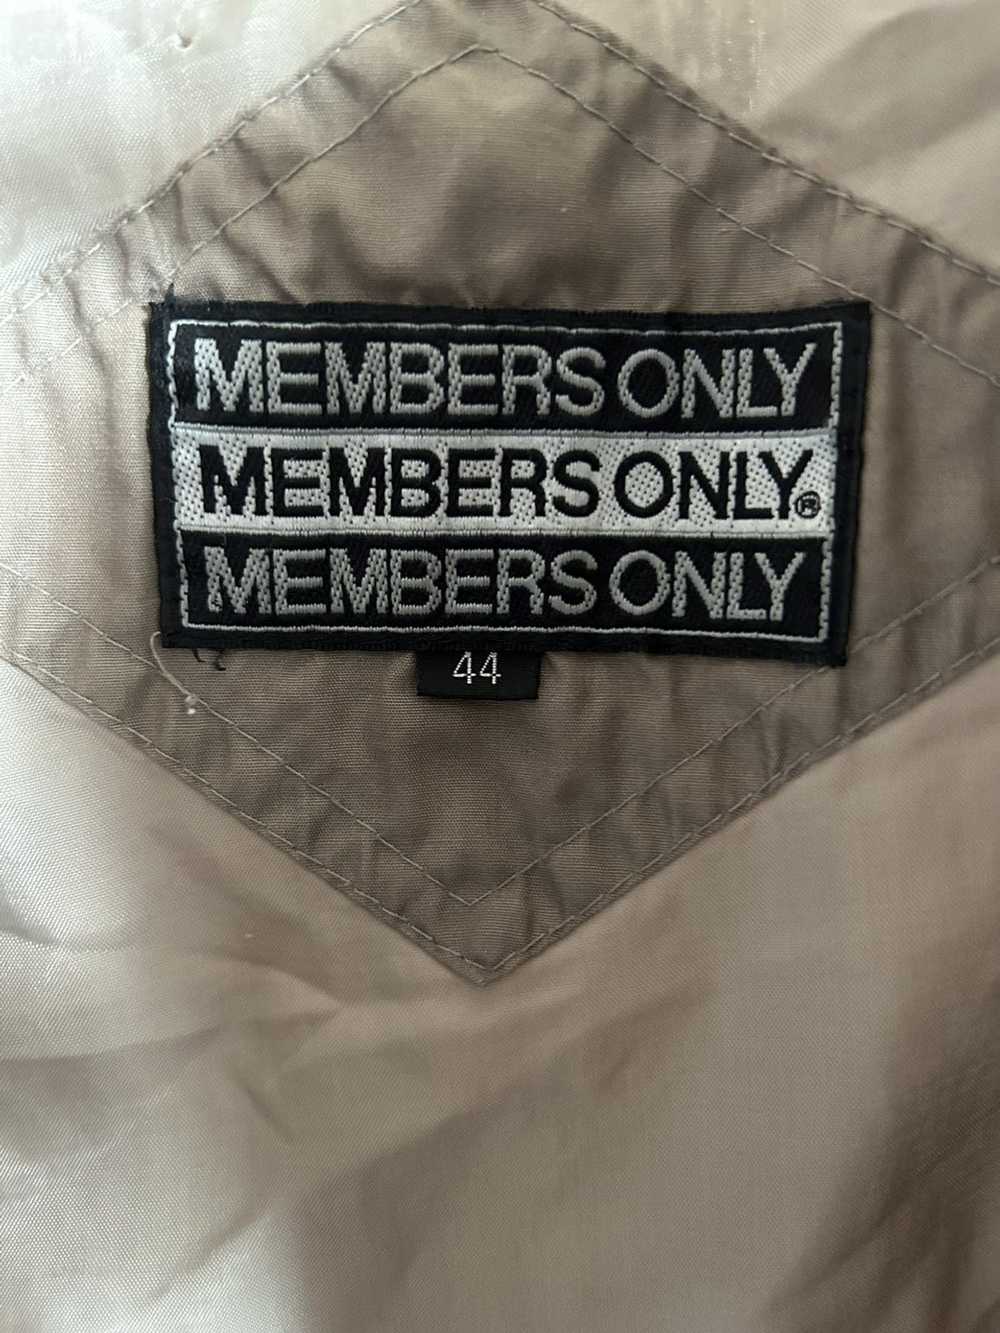 Members Only Members only Racer Jacket - image 4